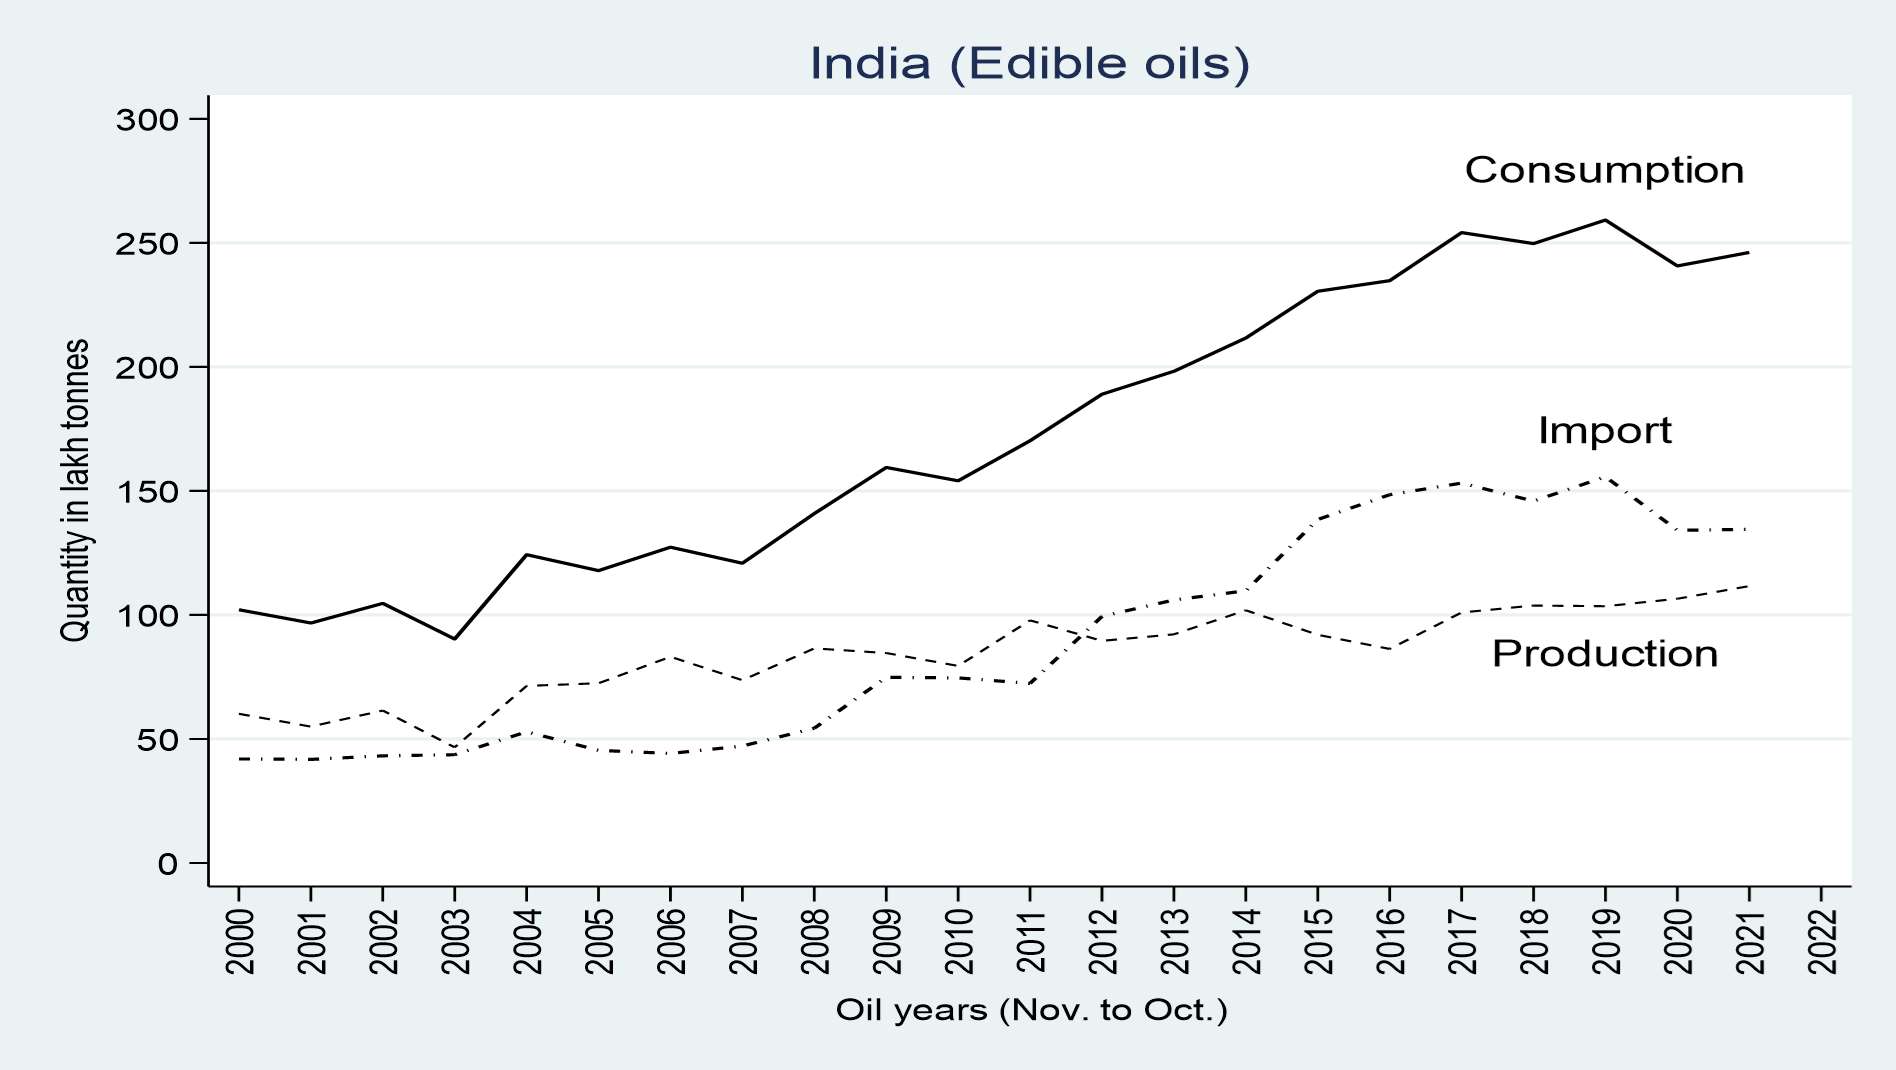 A line graph showing vegetable oil consumption, production, and importation in India over time. Imports are higher than production.